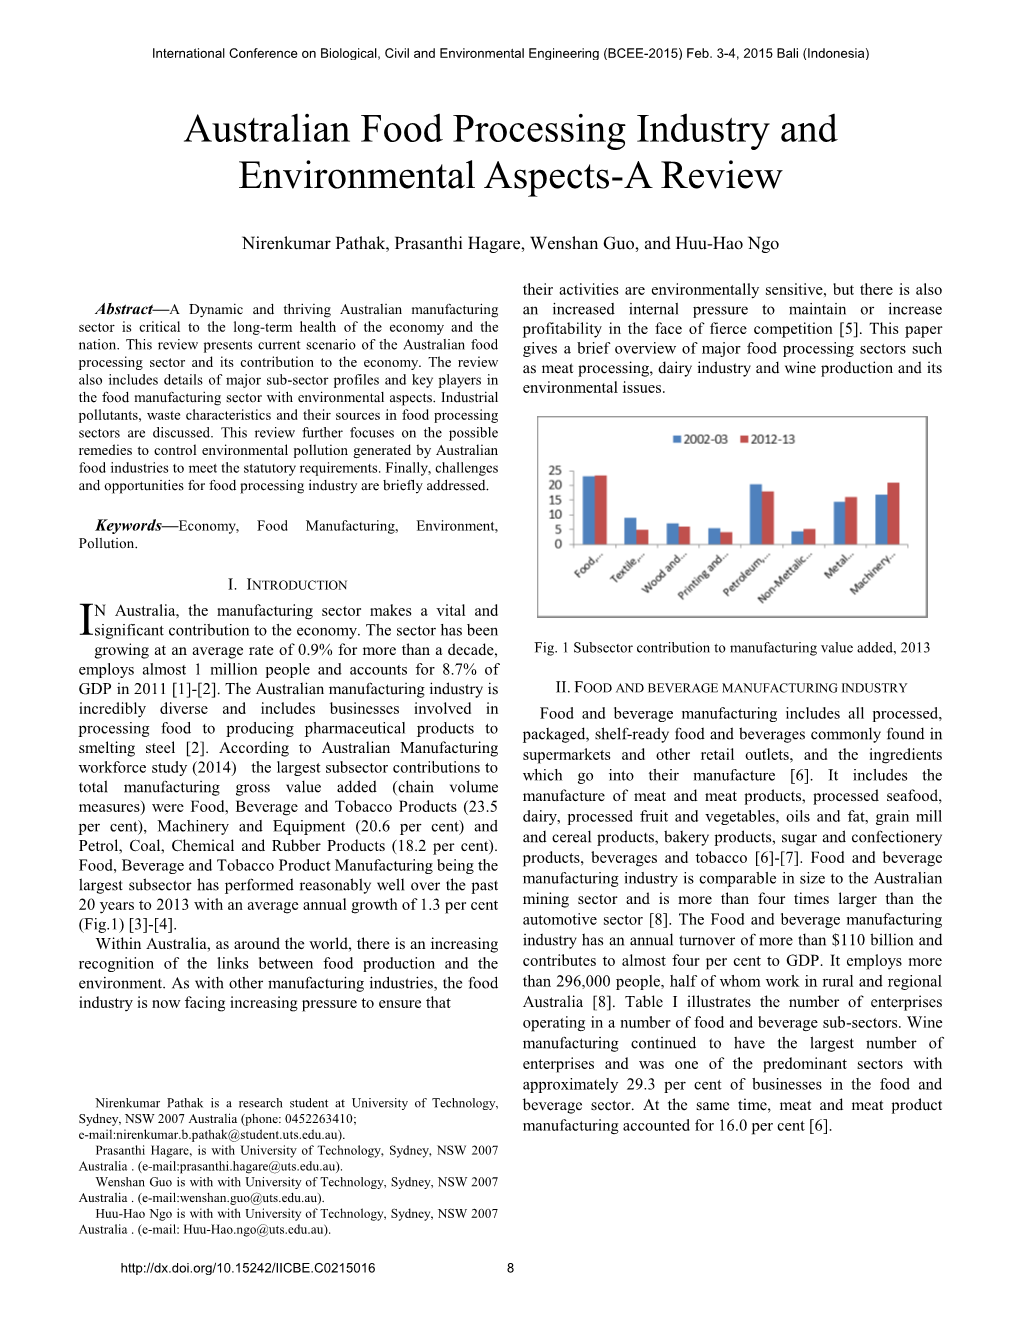 Australian Food Processing Industry and Environmental Aspects-A Review